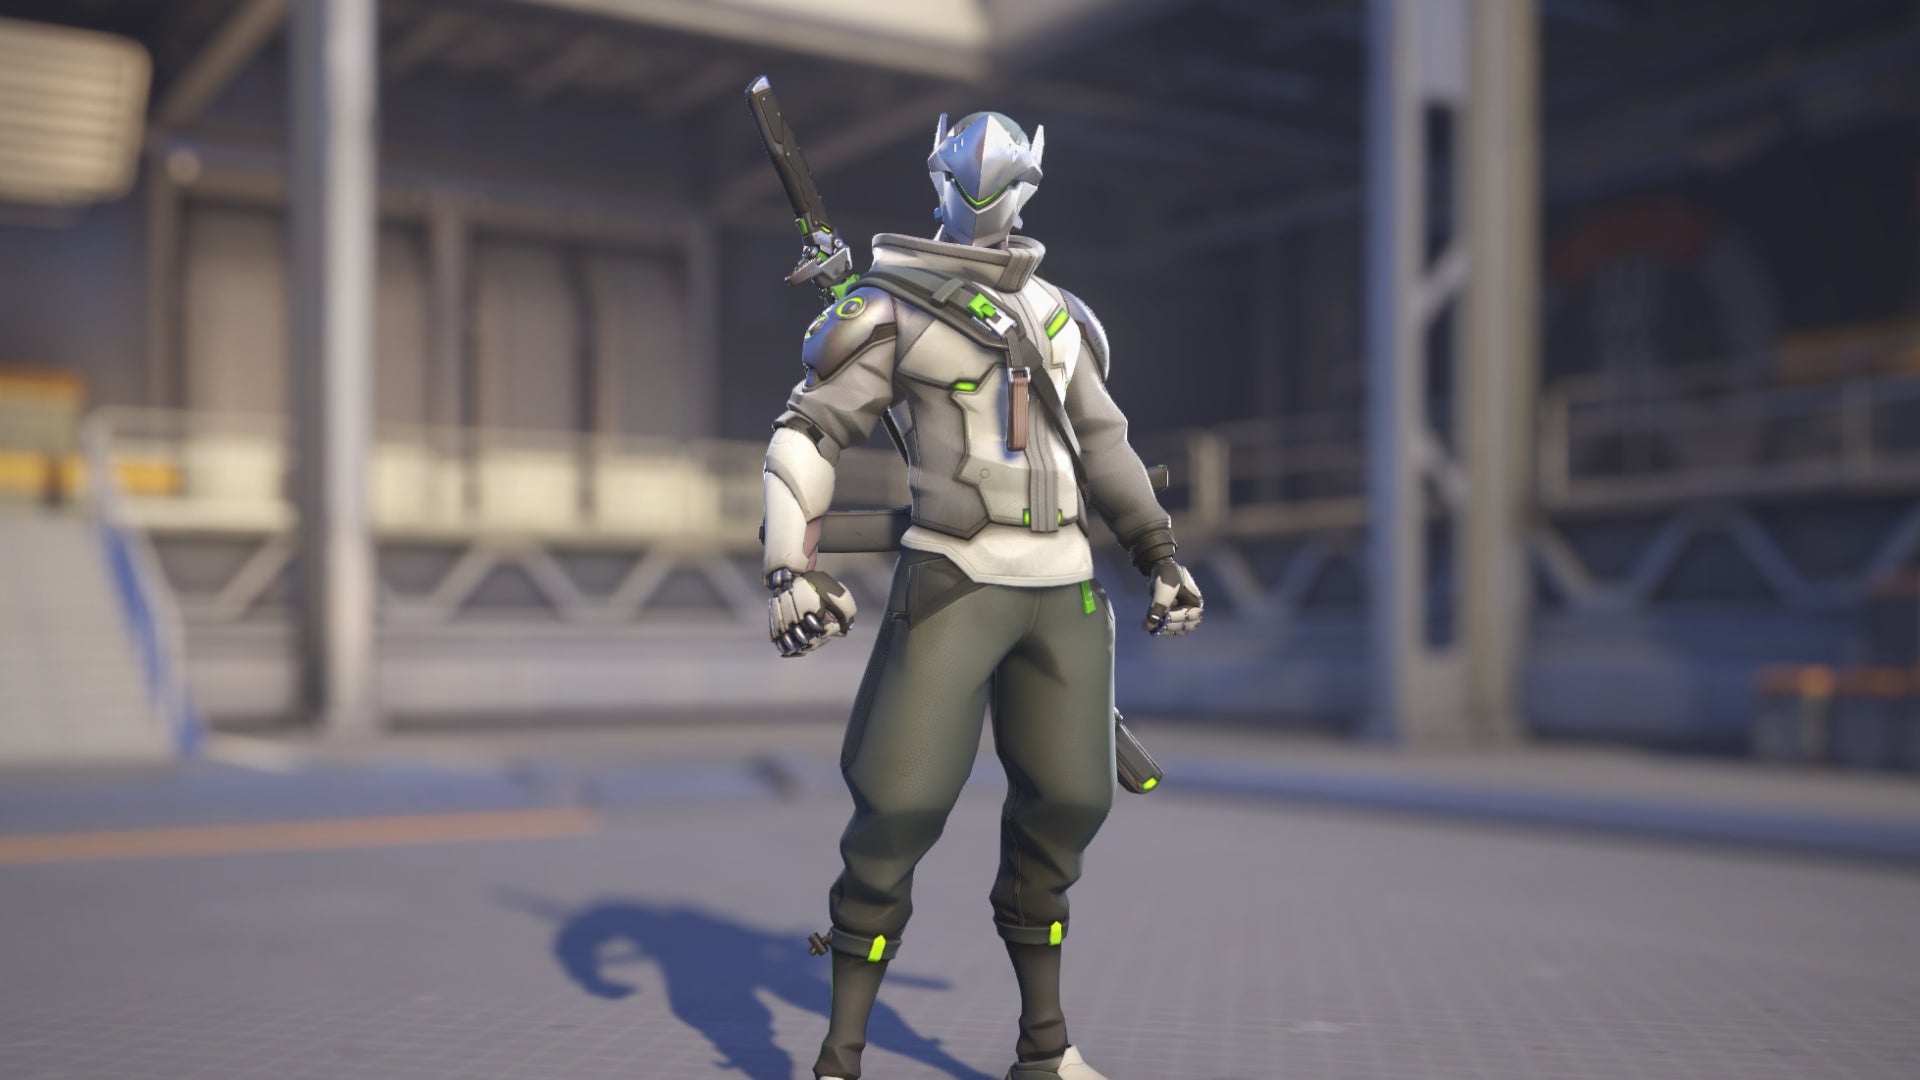 Genji, a hero in Overwatch 2, poses before the camera in the hero selection screen.